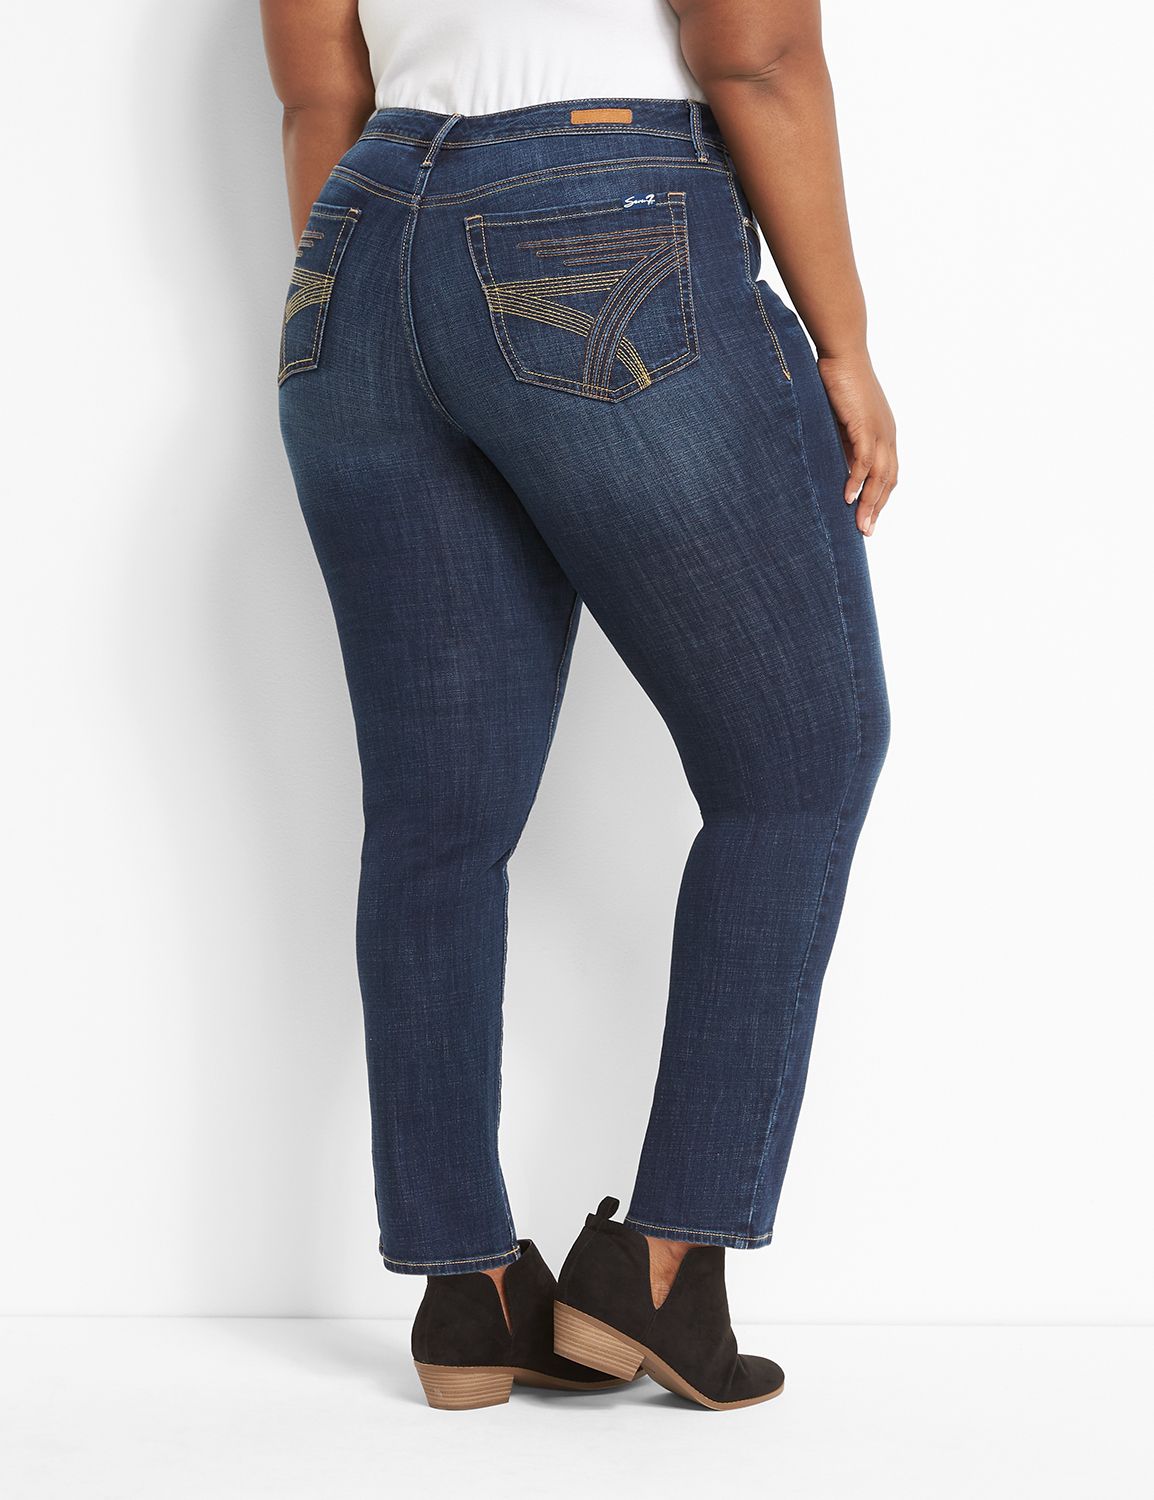 Seven7 Straight With Back Pocket Embroidery | LaneBryant